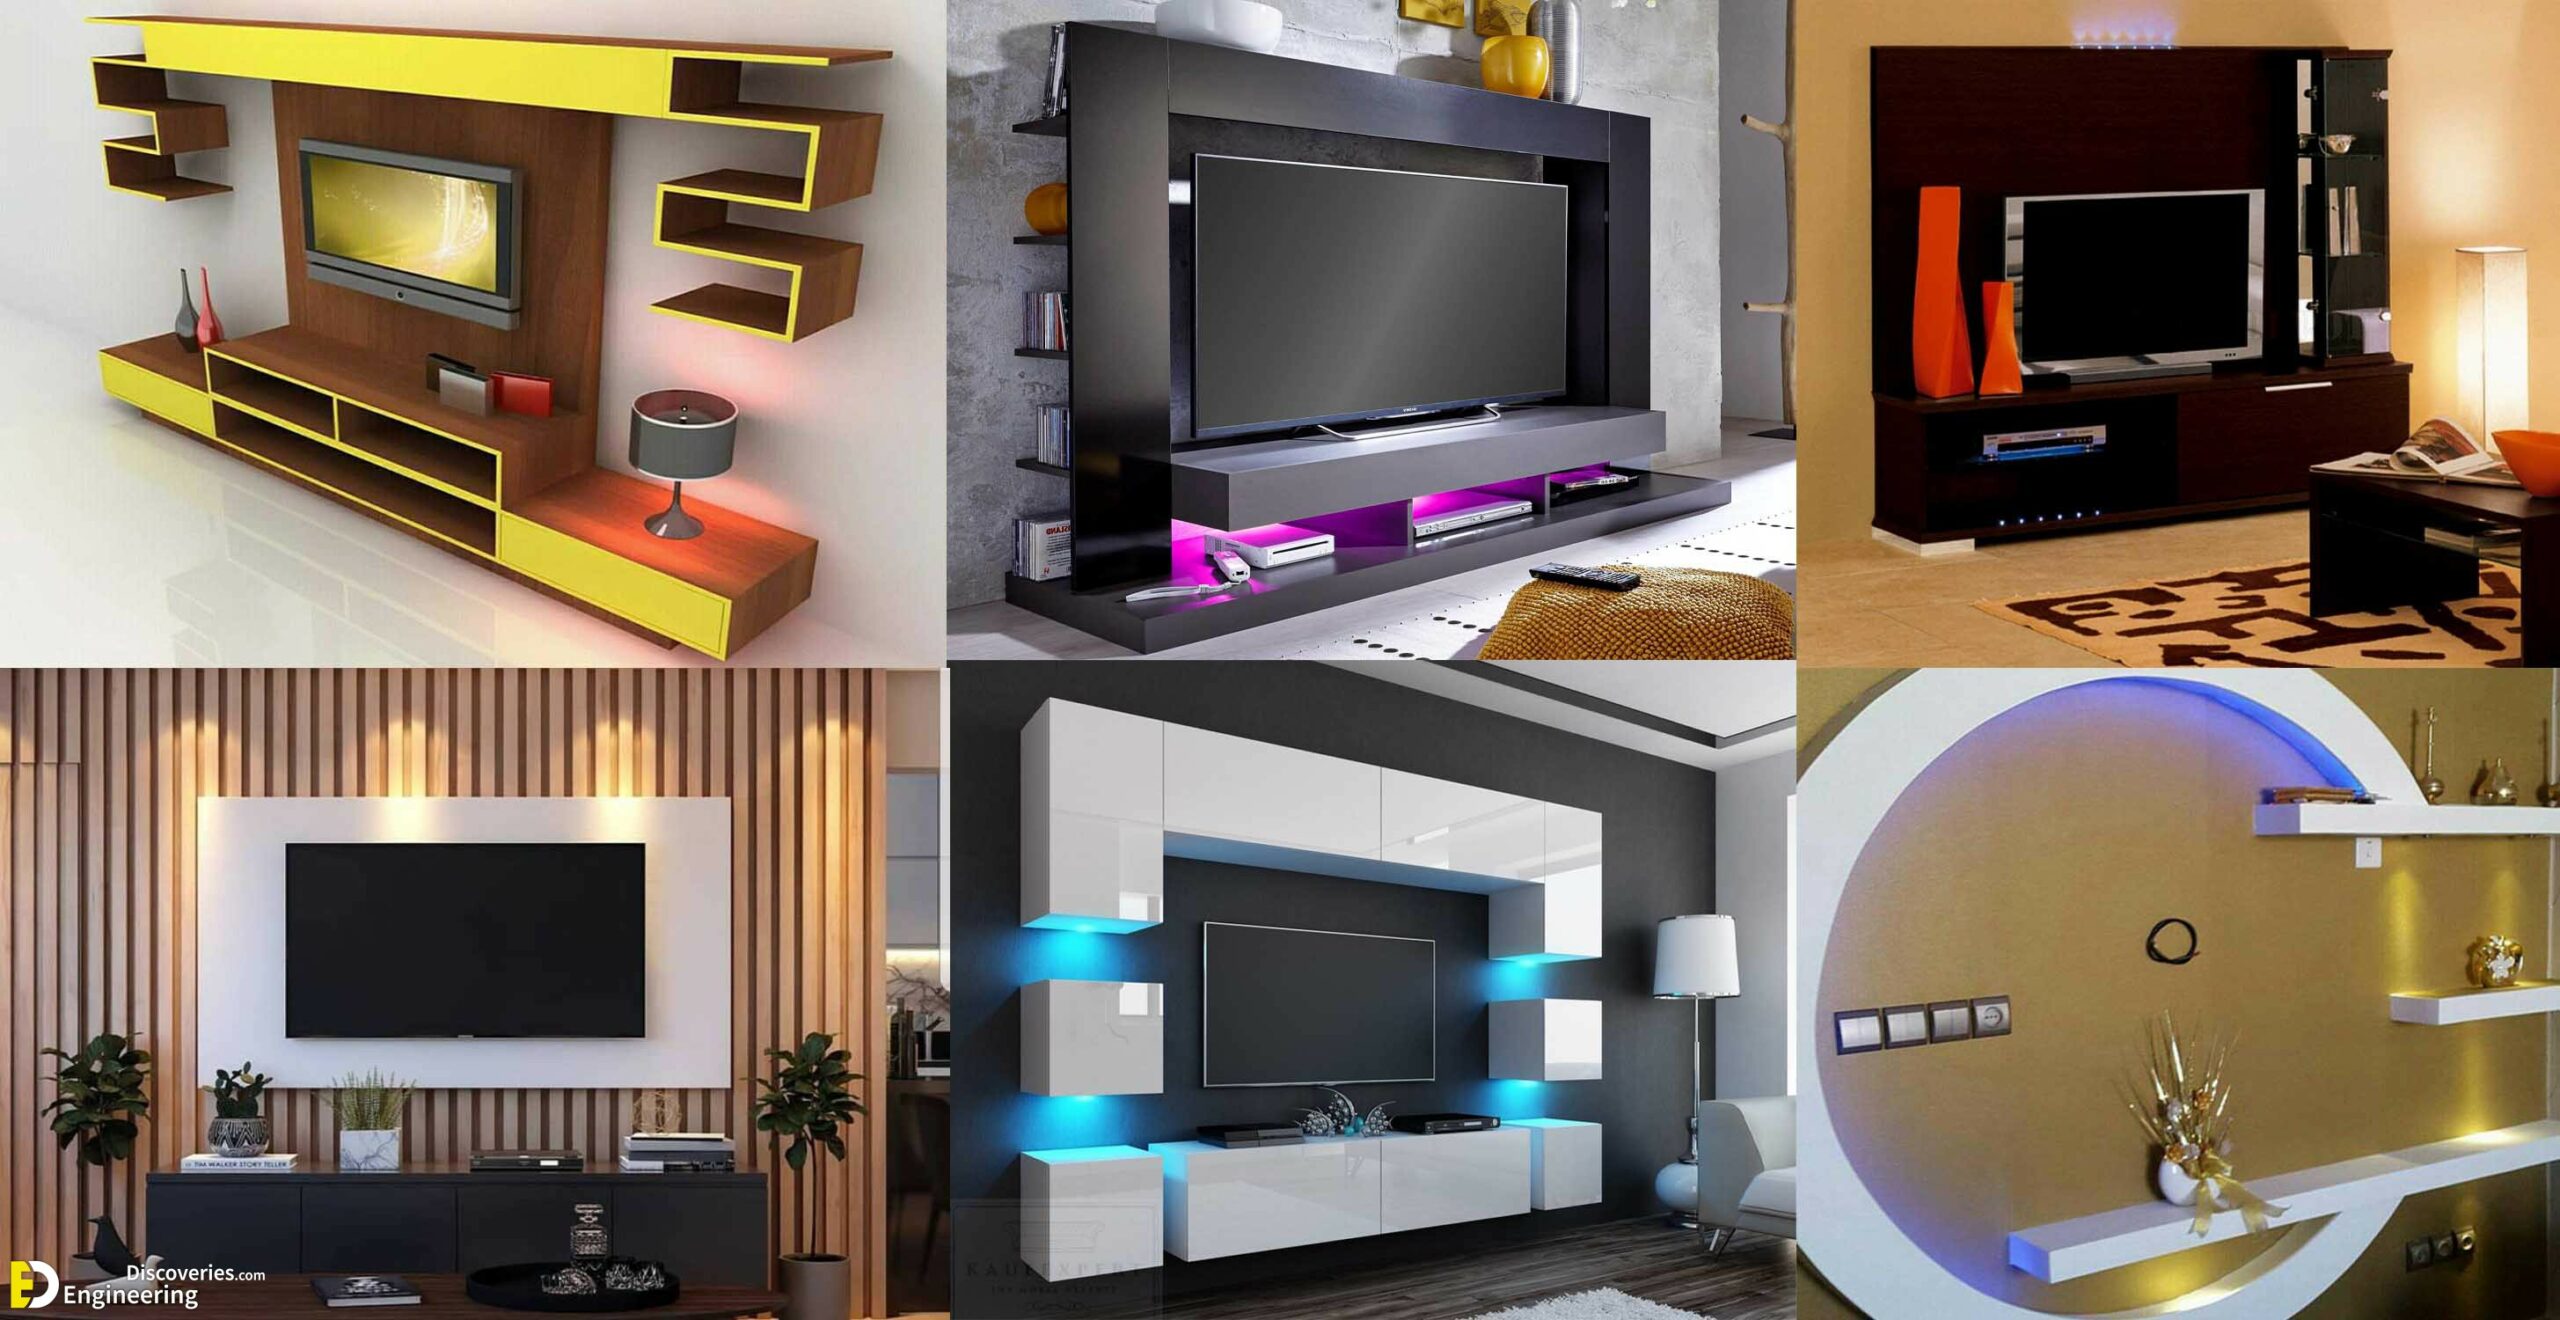 Top 50 Modern Tv Stand Design Ideas For 2020 Engineering Discoveries Enjoy free shipping on most stuff, even big stuff. top 50 modern tv stand design ideas for